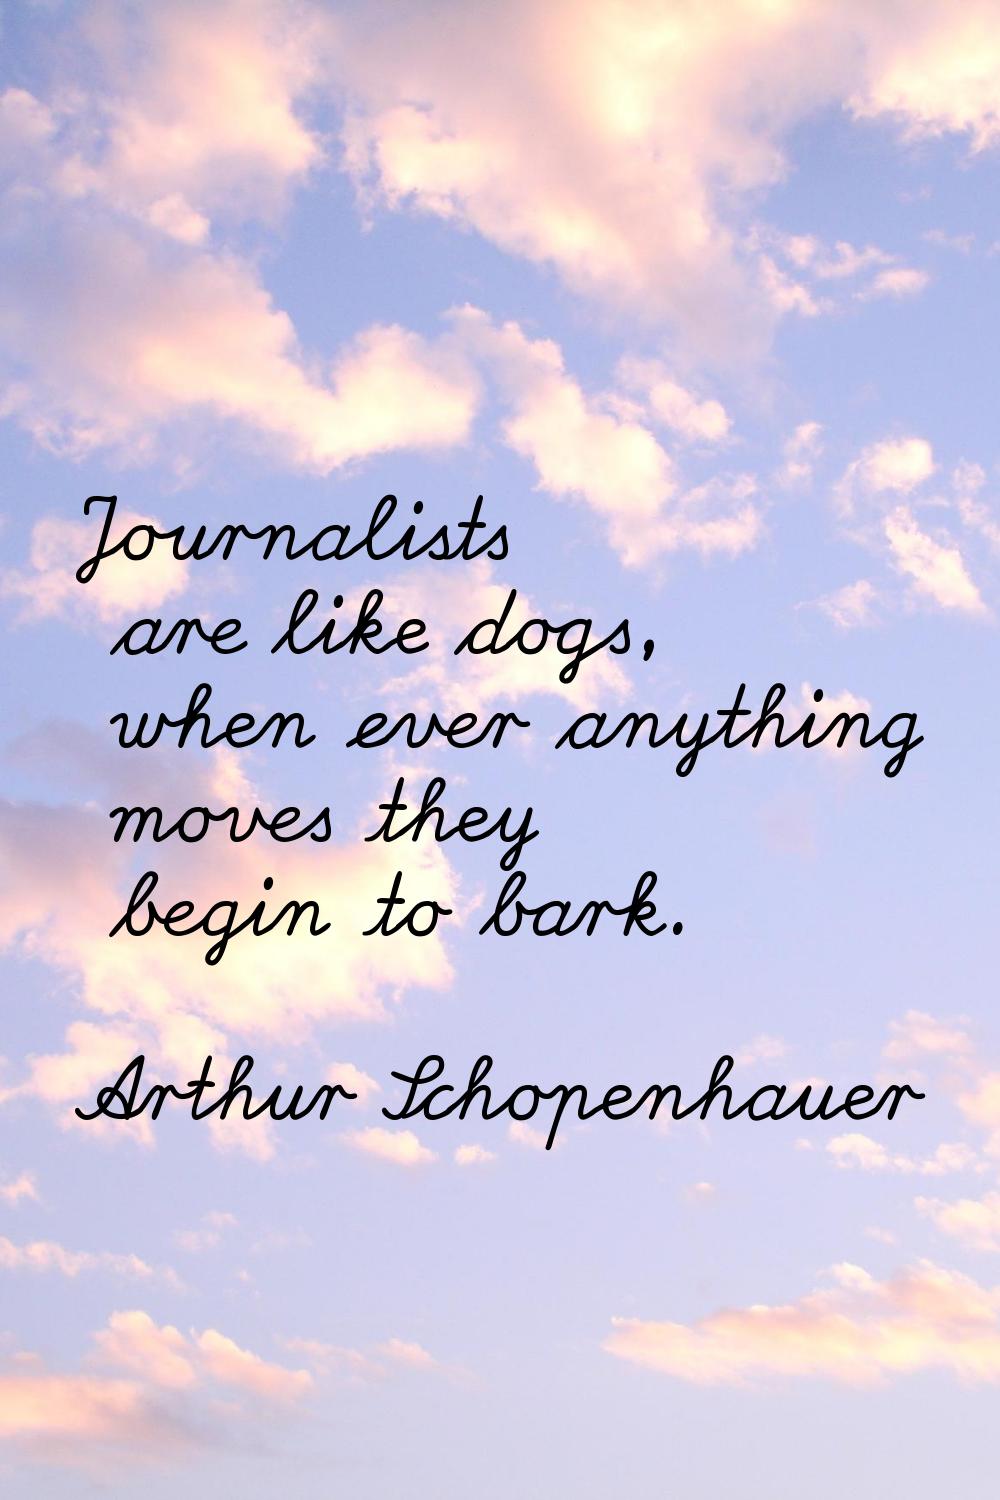 Journalists are like dogs, when ever anything moves they begin to bark.